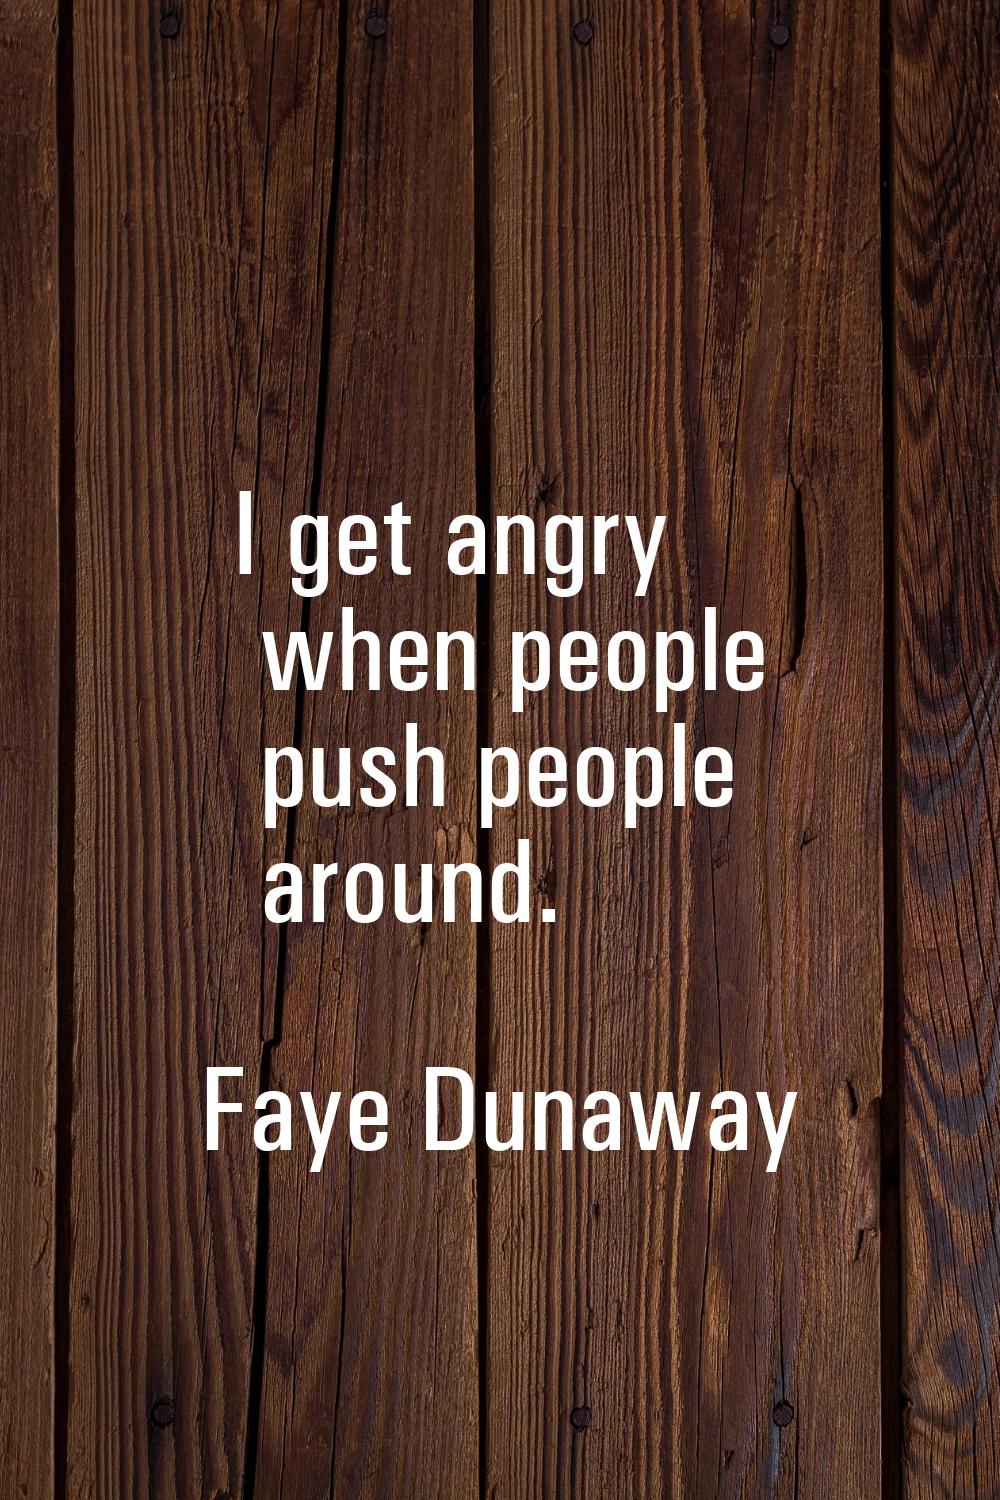 I get angry when people push people around.